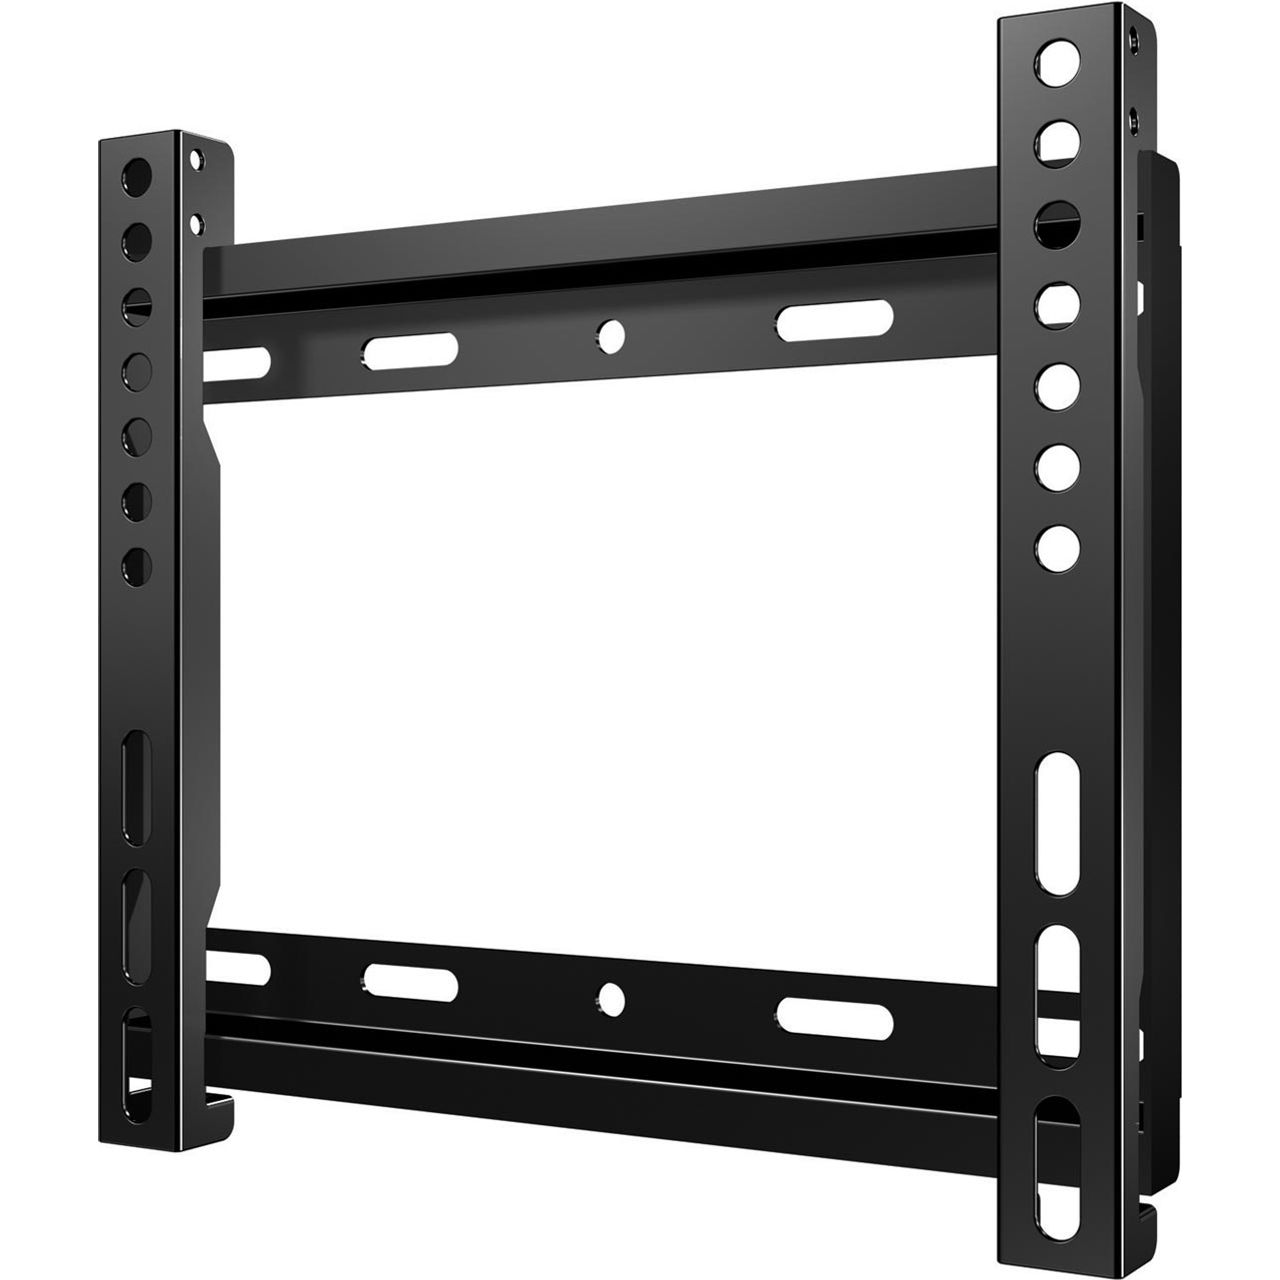 Secura QSL22-B2 Fixed TV Wall Bracket For 10 Review